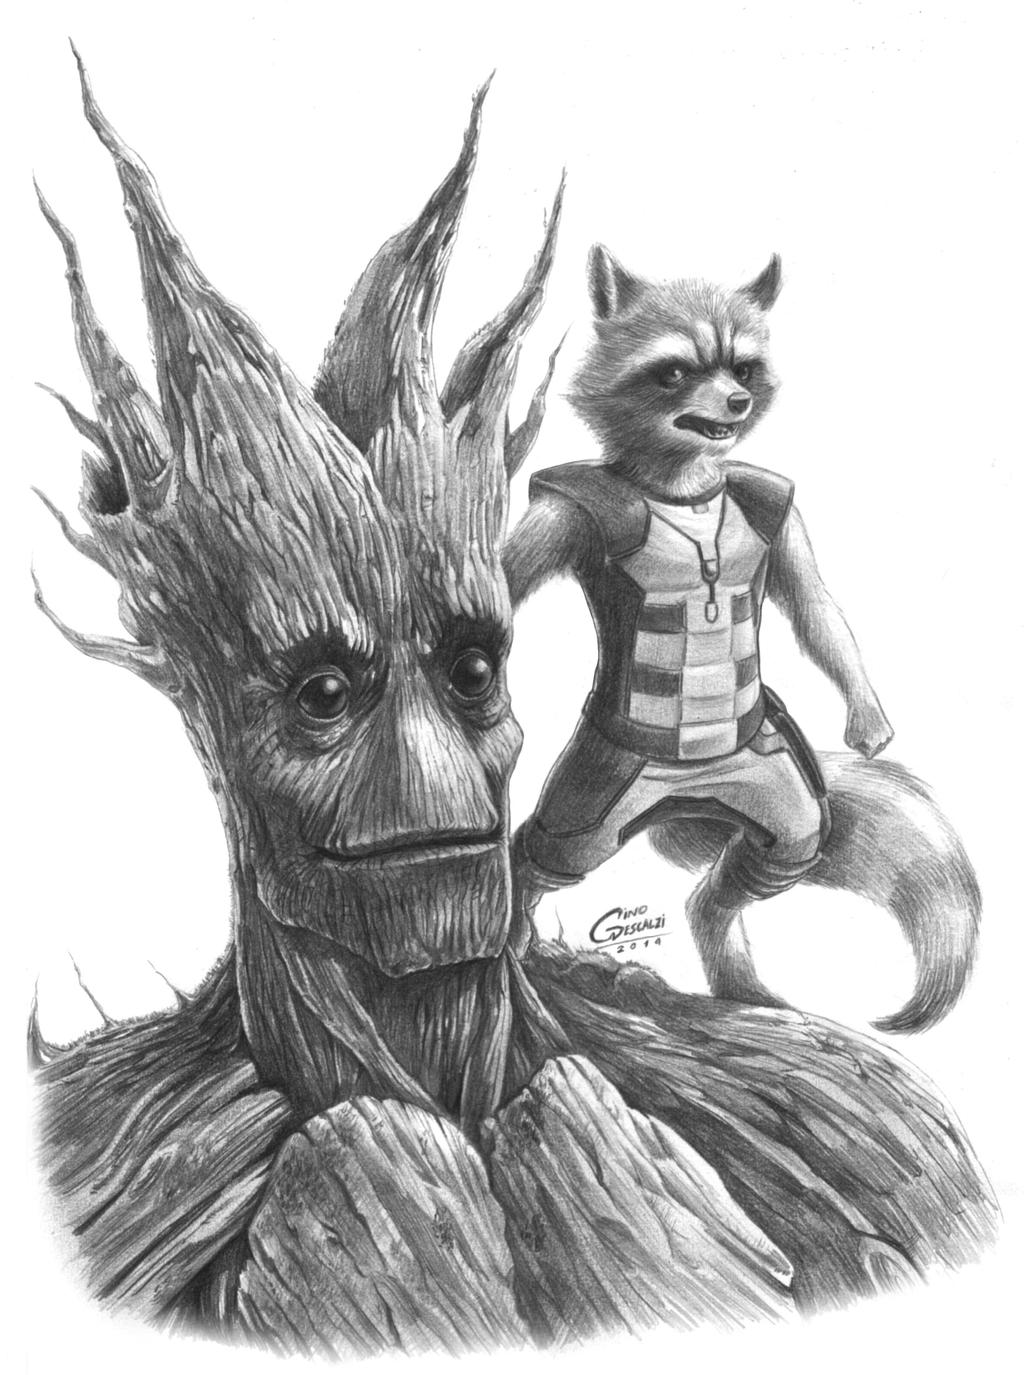 Groot and Rocket by Dreamgate-Gad on DeviantArt